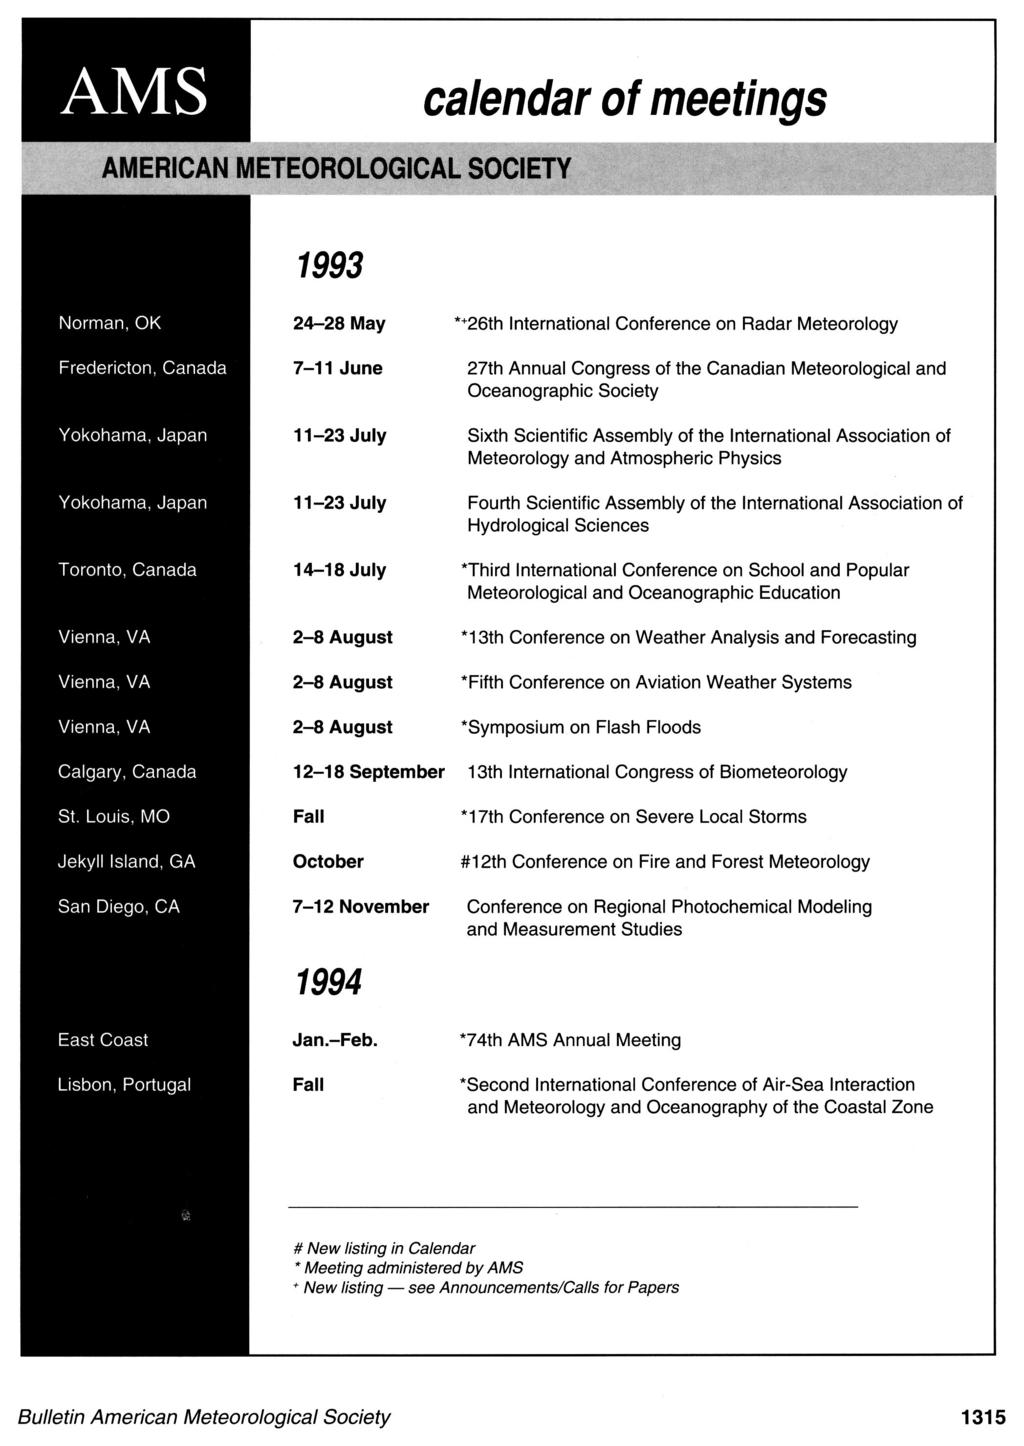 1993 Norman, OK 24-28 May * 26th International Conference on Radar Meteorology Fredericton, Canada 7-11 June 27th Annual Congress of the Canadian Meteorological and Oceanographic Society Yokohama,